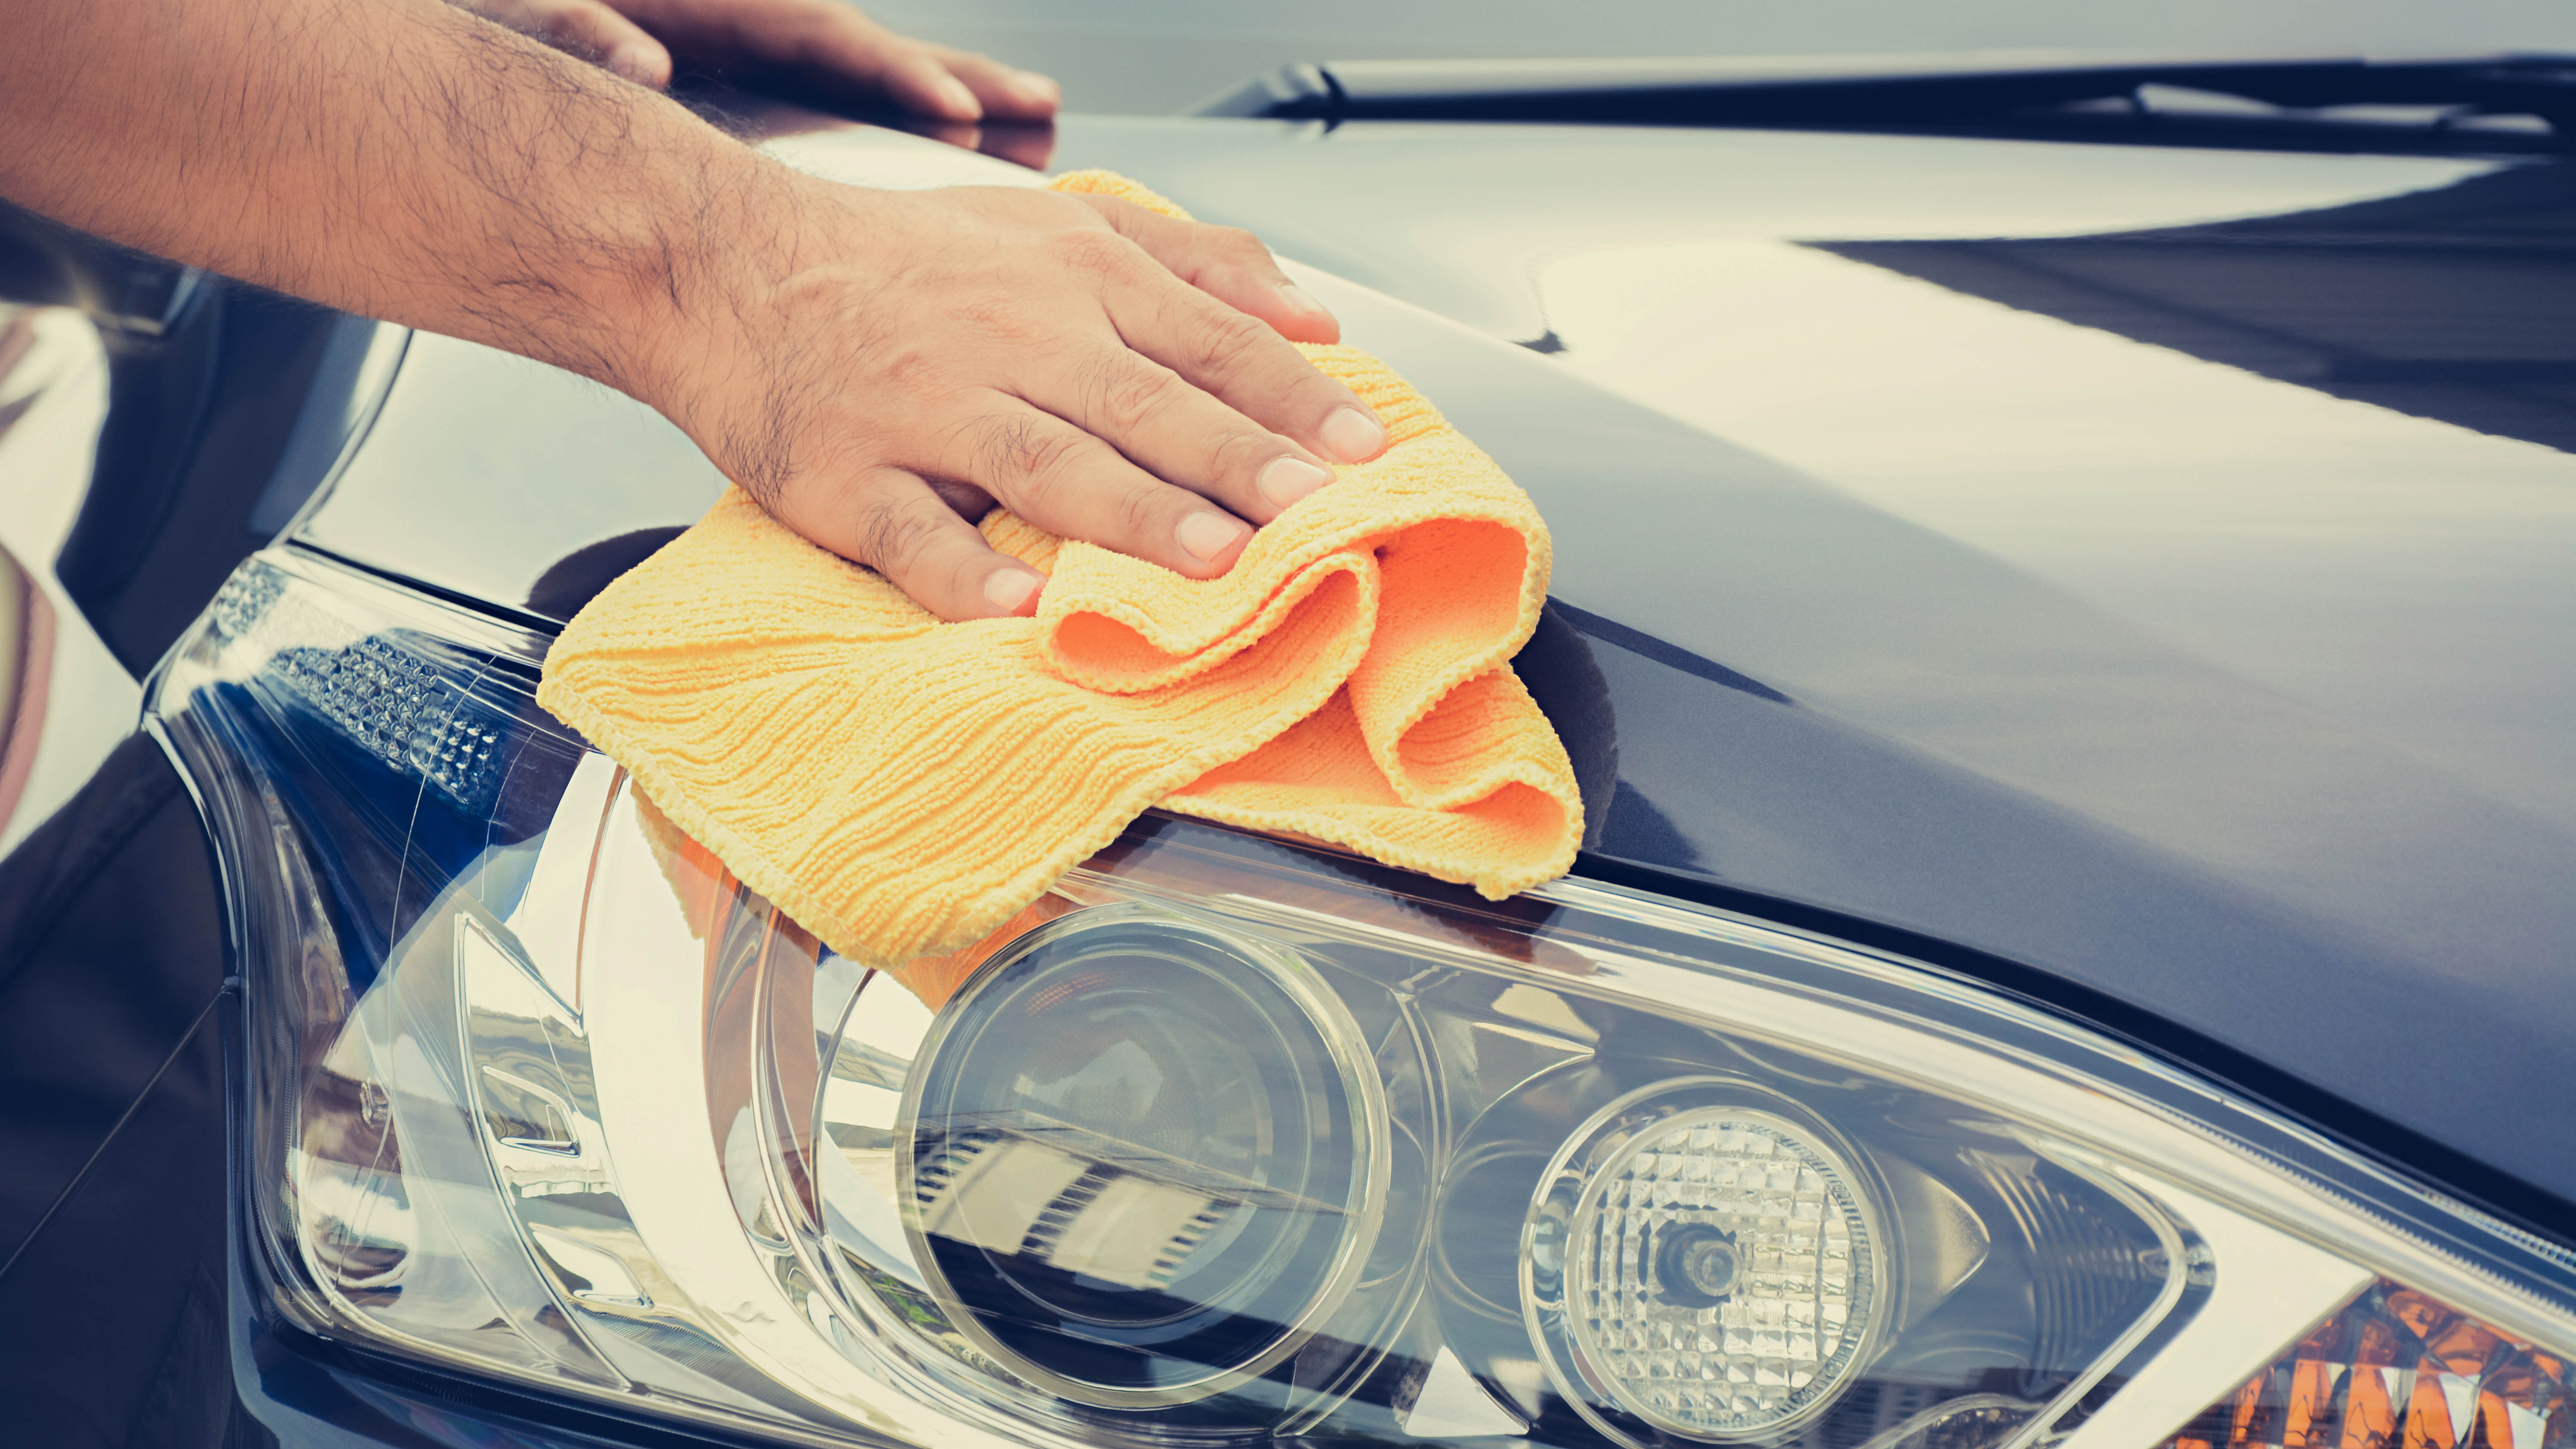 A microfiber cloth being used to clean a car